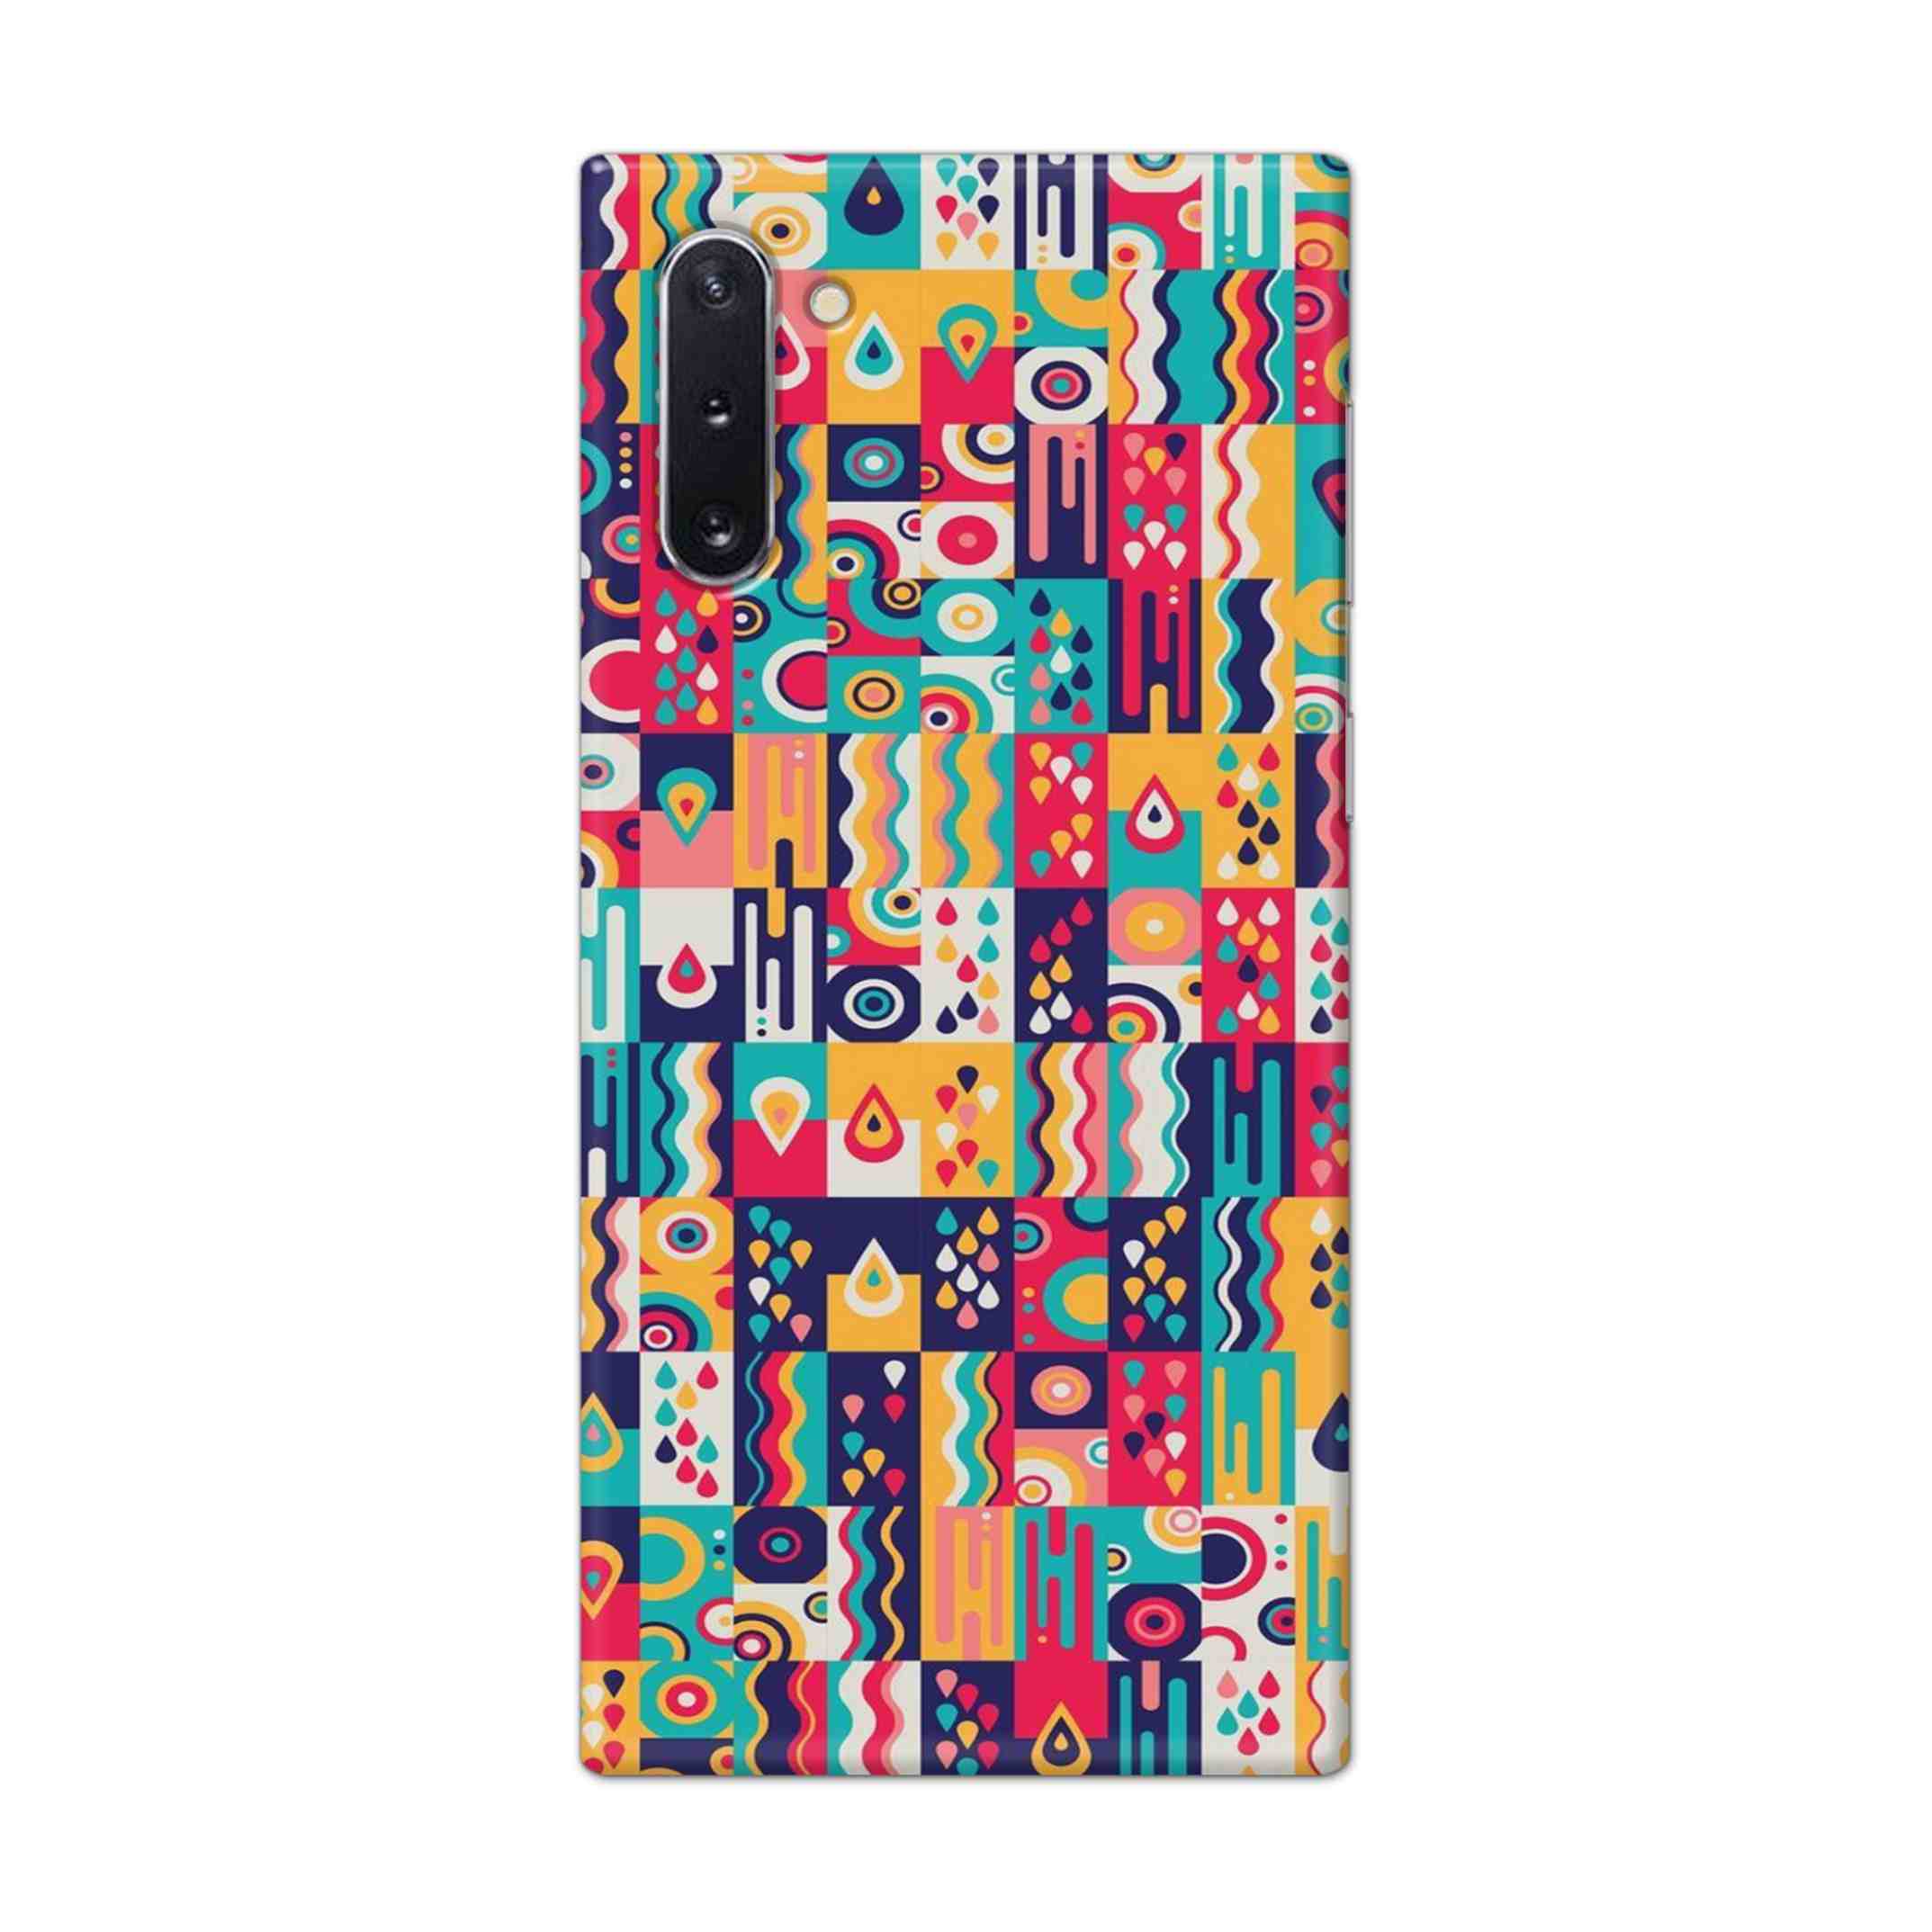 Buy Art Hard Back Mobile Phone Case Cover For Samsung Galaxy Note 10 Online